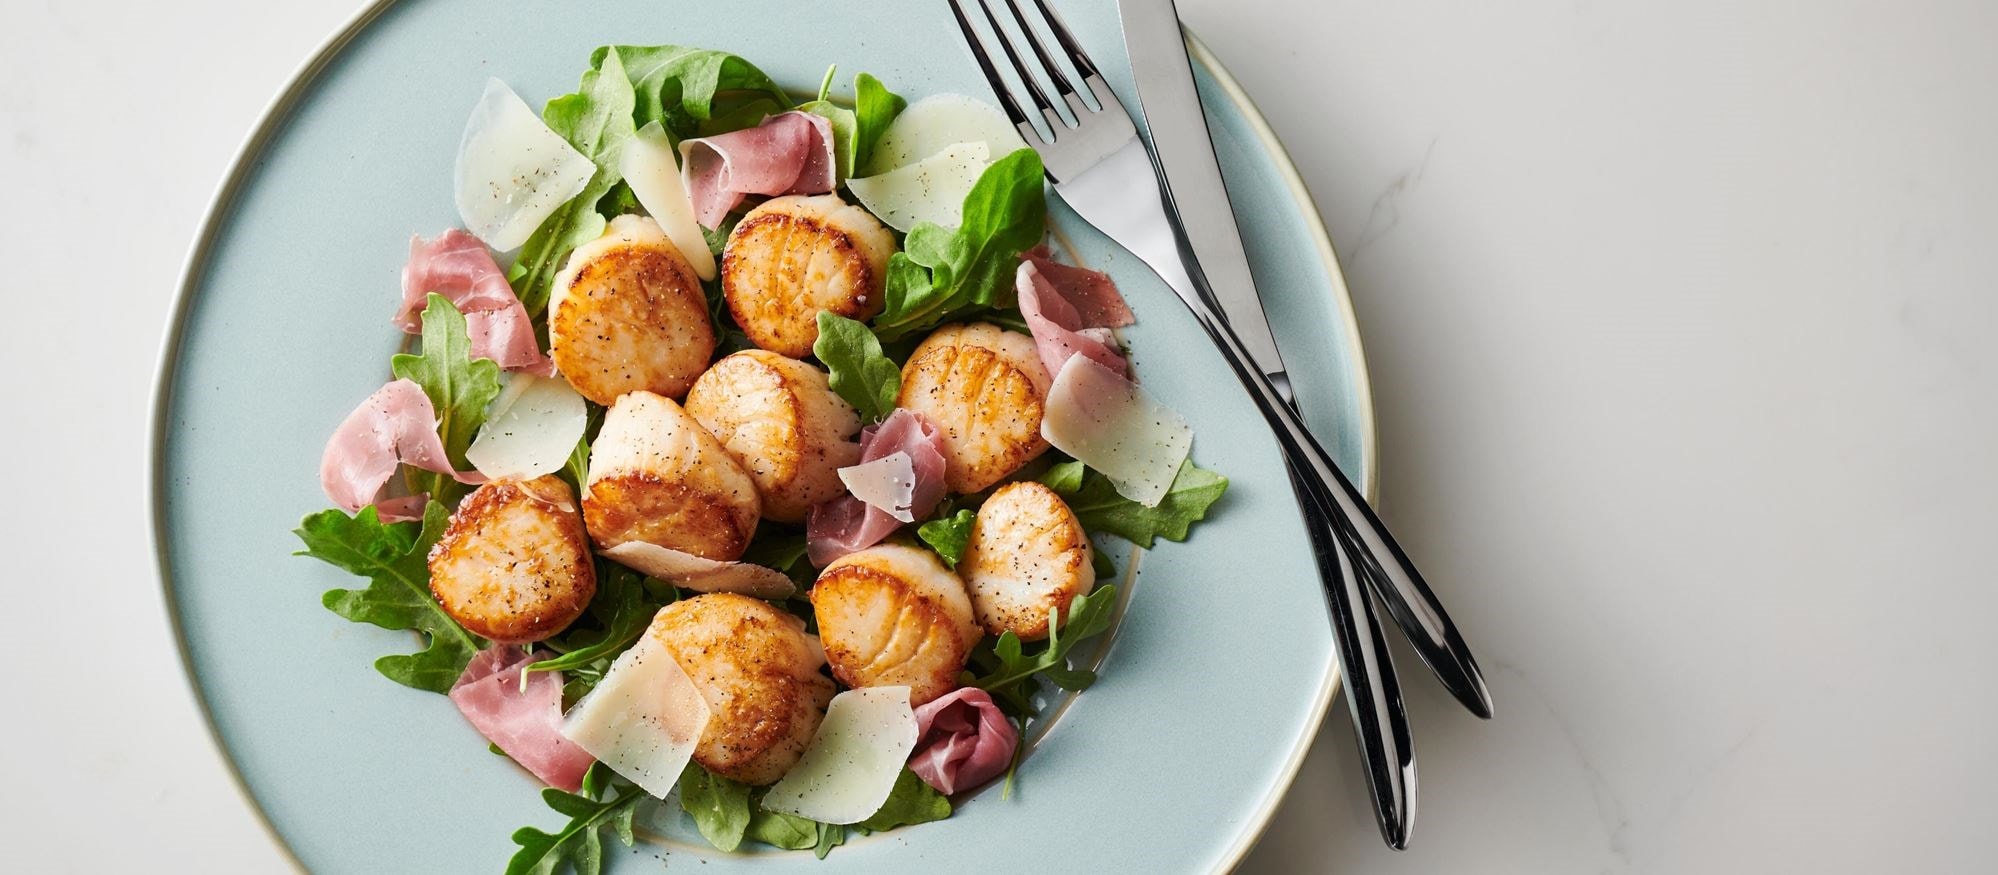 Easy and delicious Scallops recipe using the Griddle Mode setting of your Wolf Dual Fuel Range